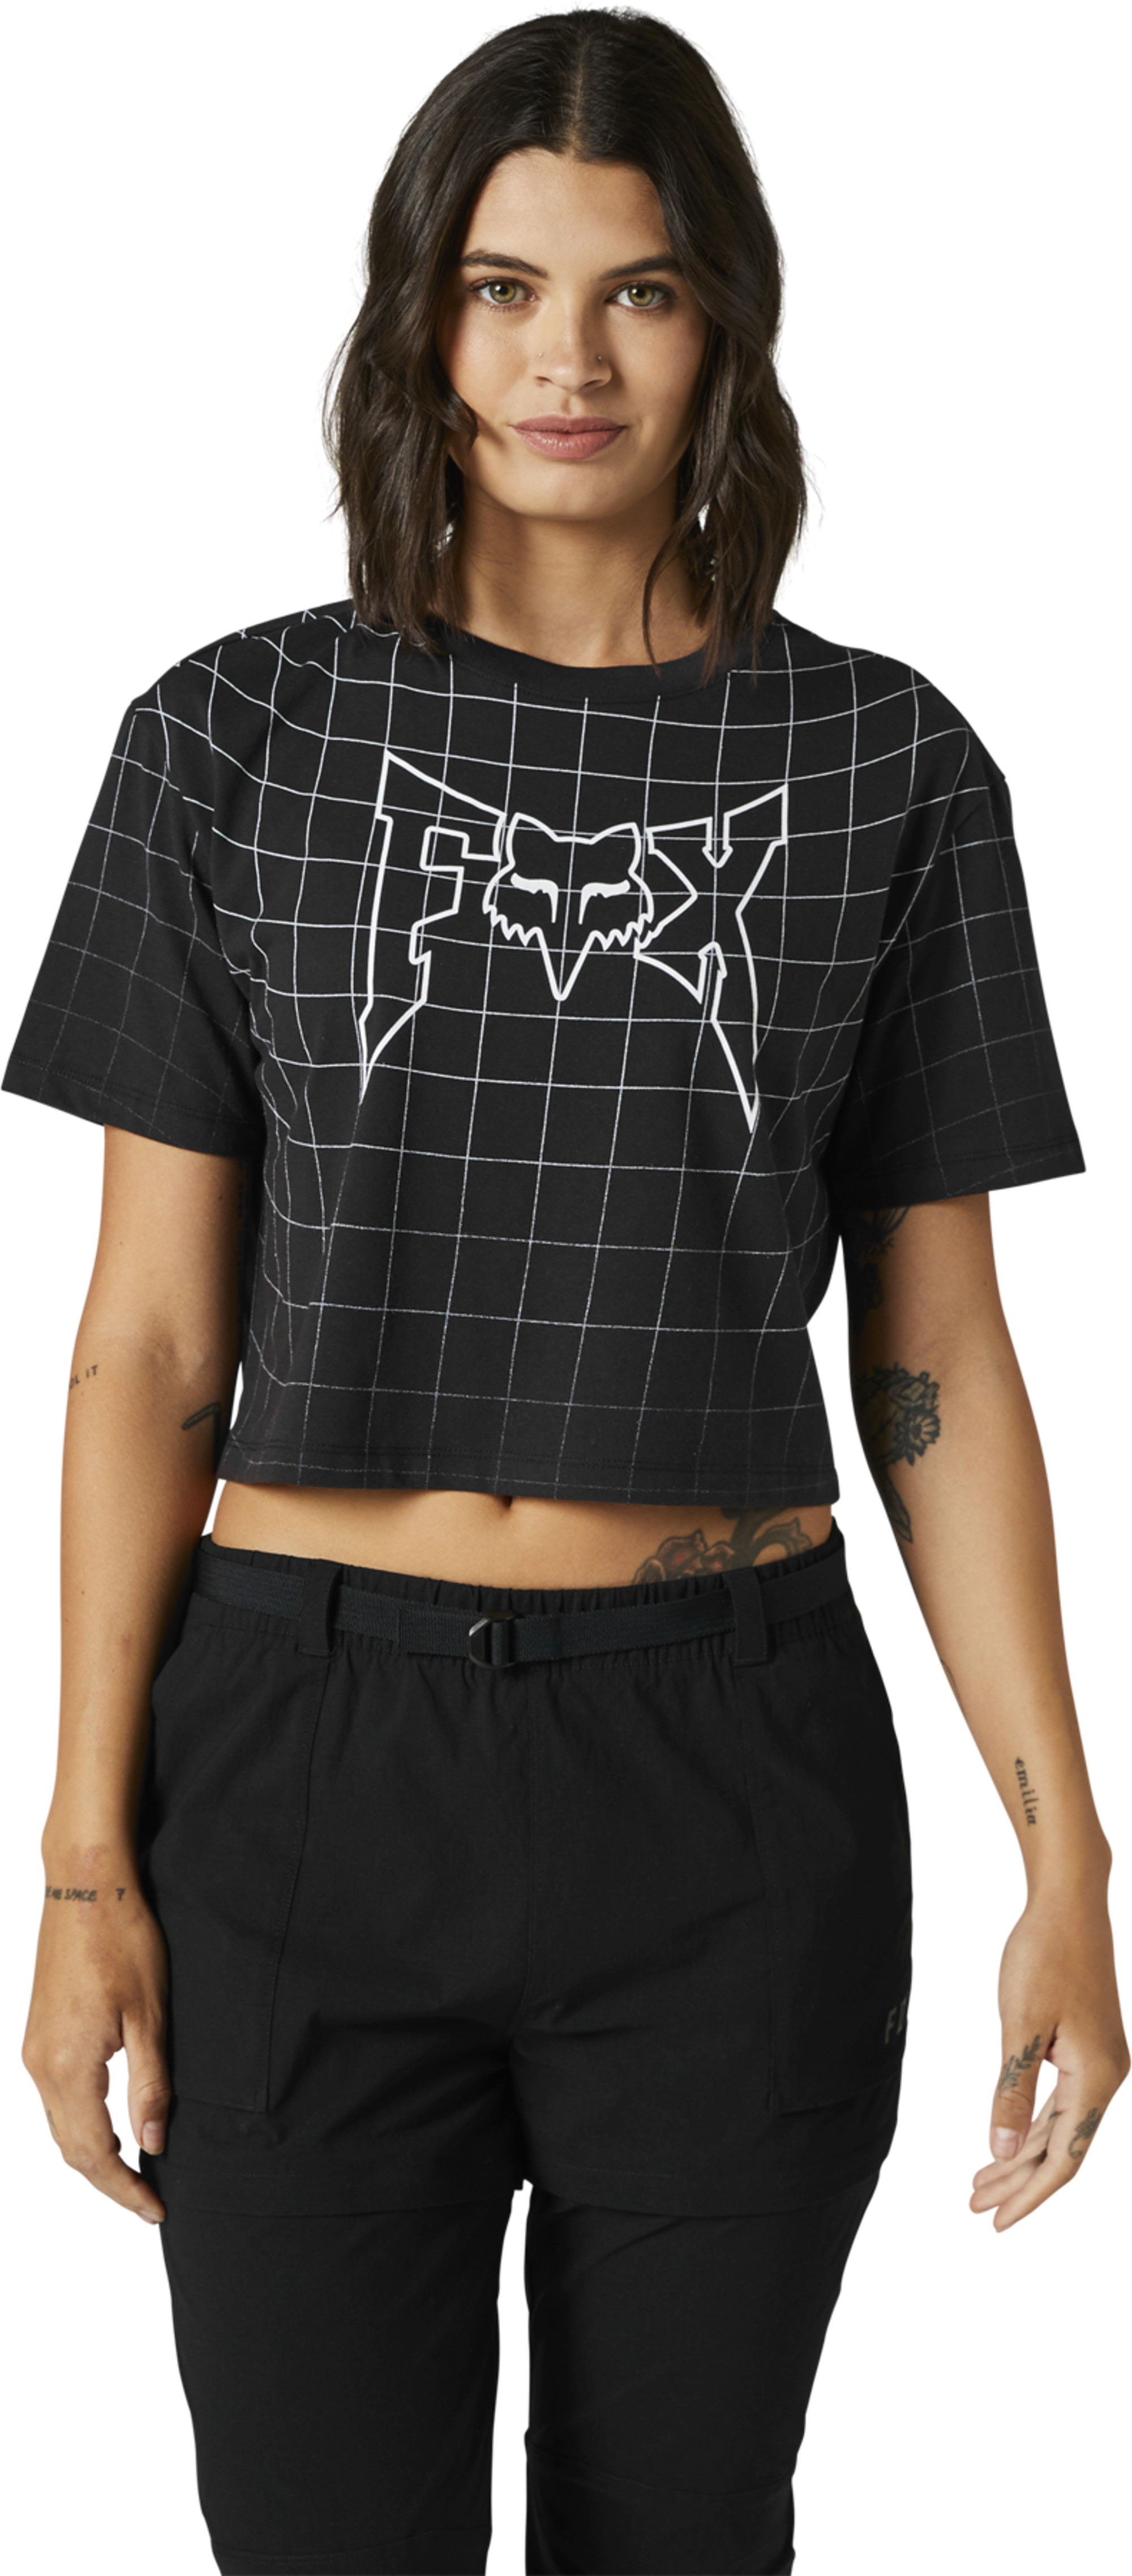   celz cropped tee